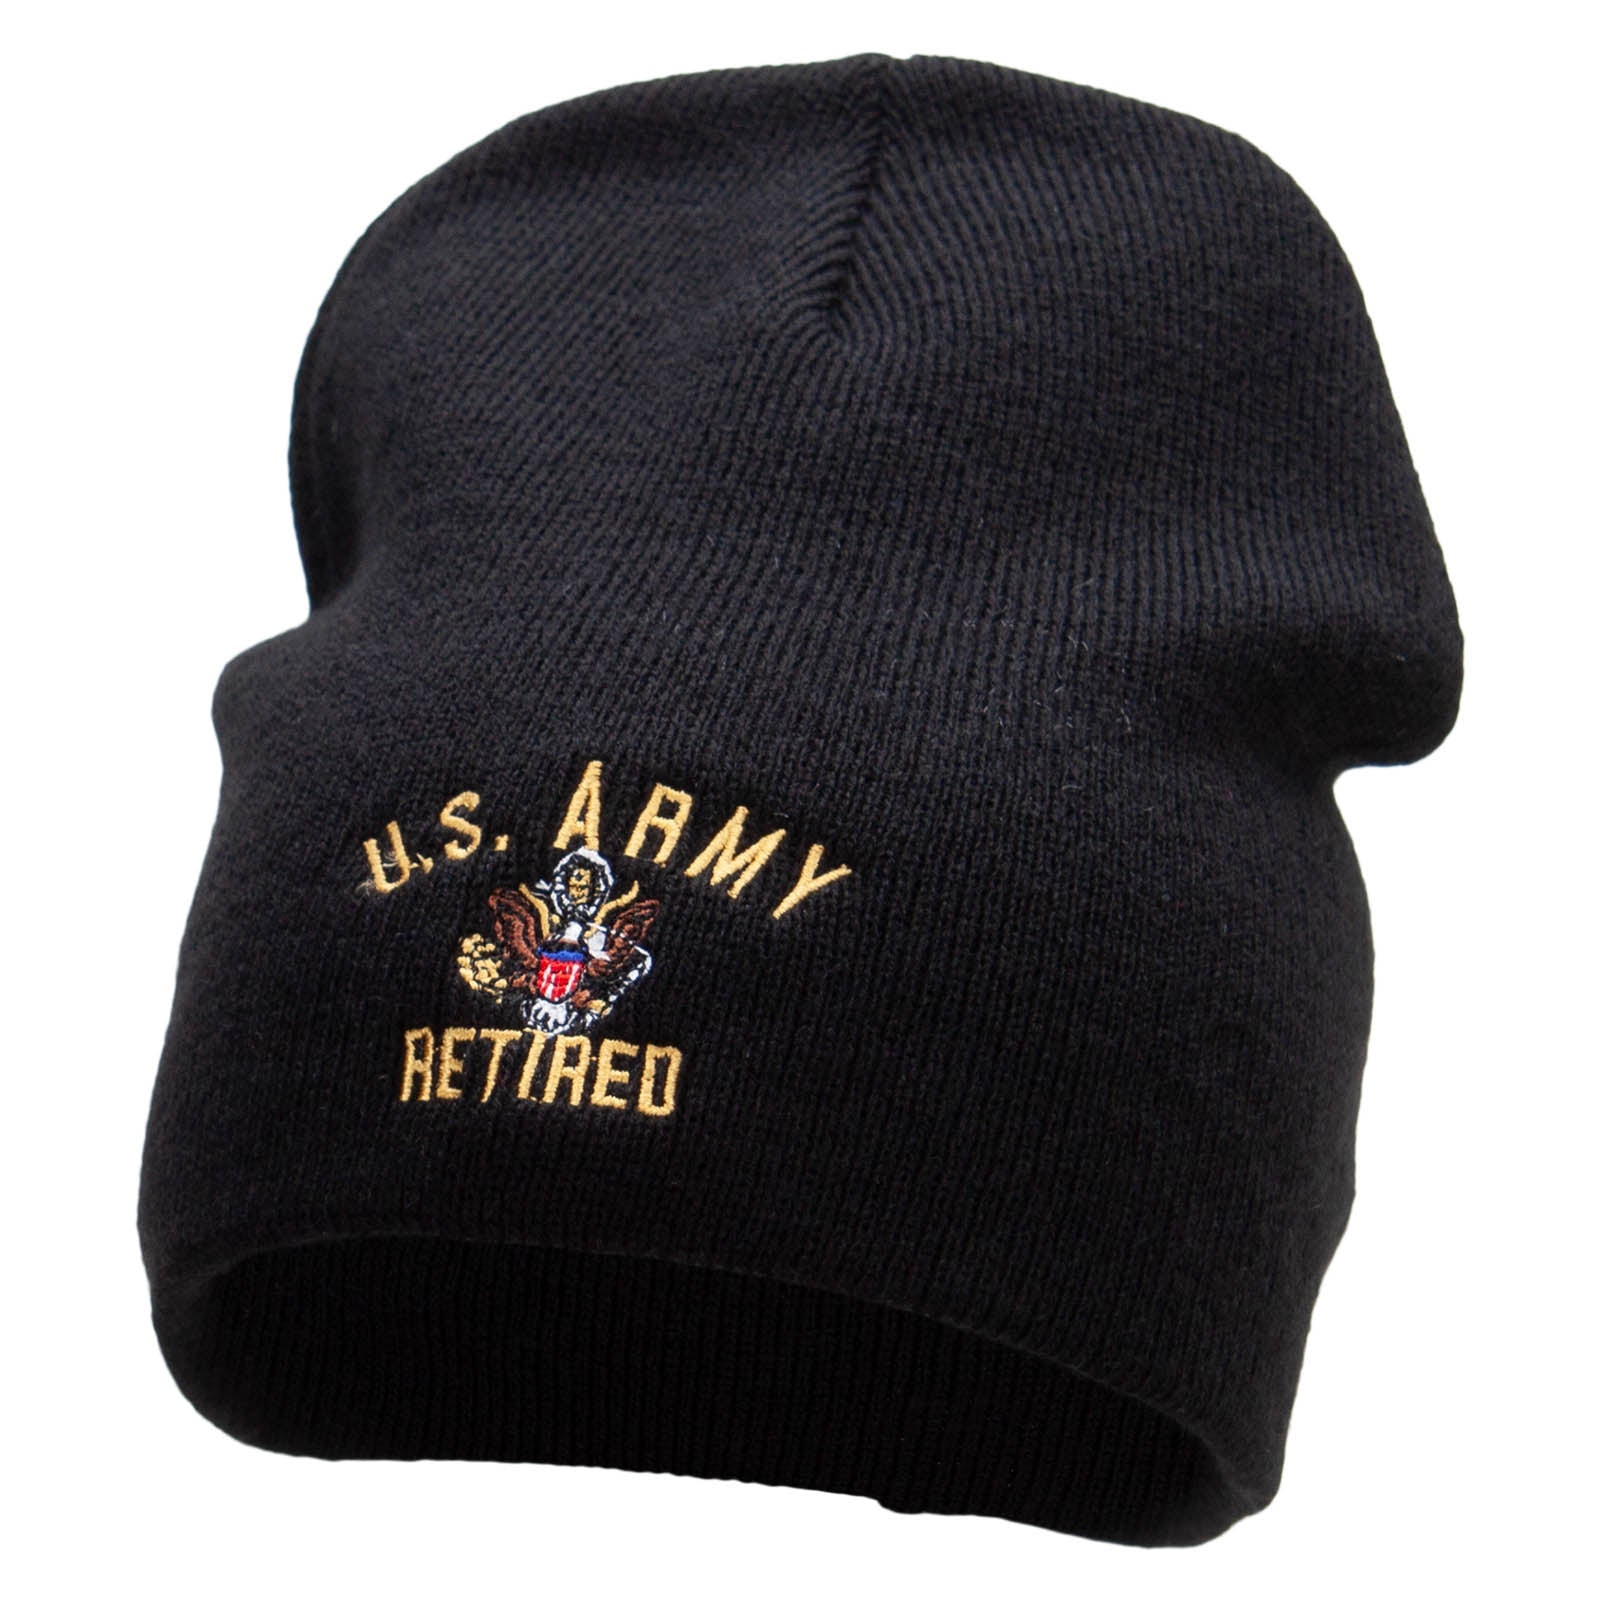 US Army Retired Military Embroidered Big Size 8 Inch New Solid Color Short Beanie - Black XL-3XL